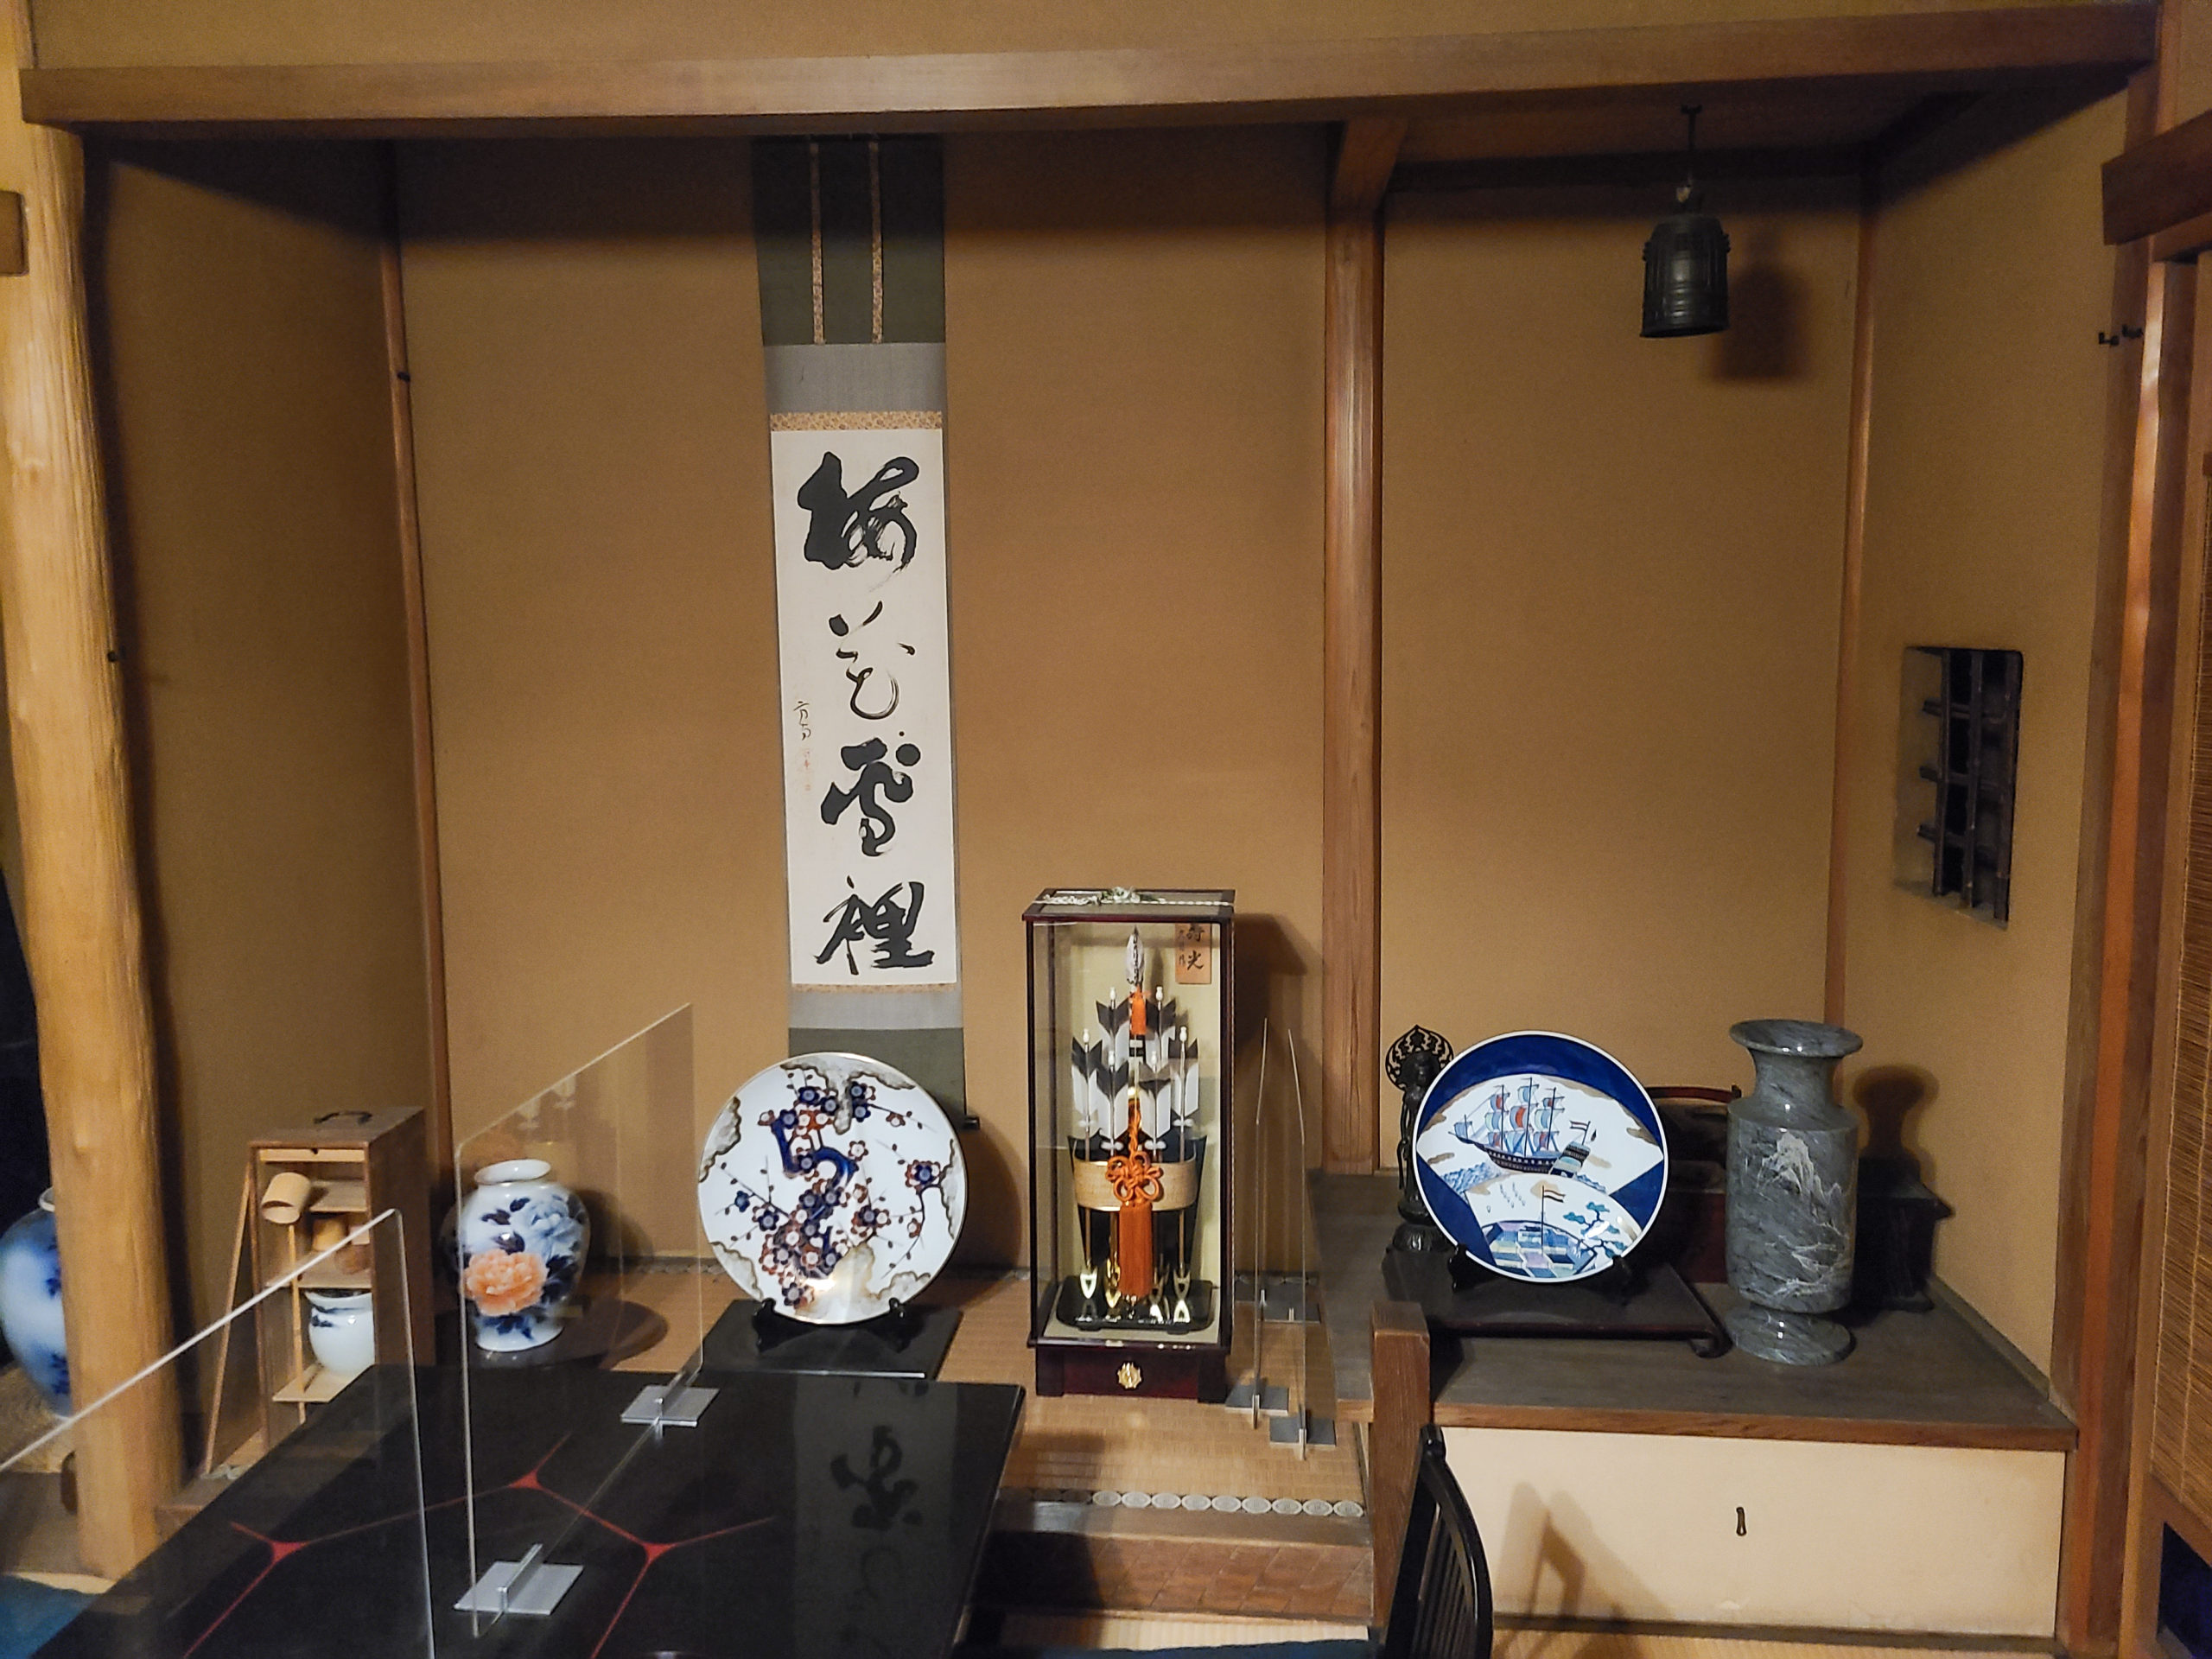 The tokonoma (alcove) with hanging scroll and various antiques